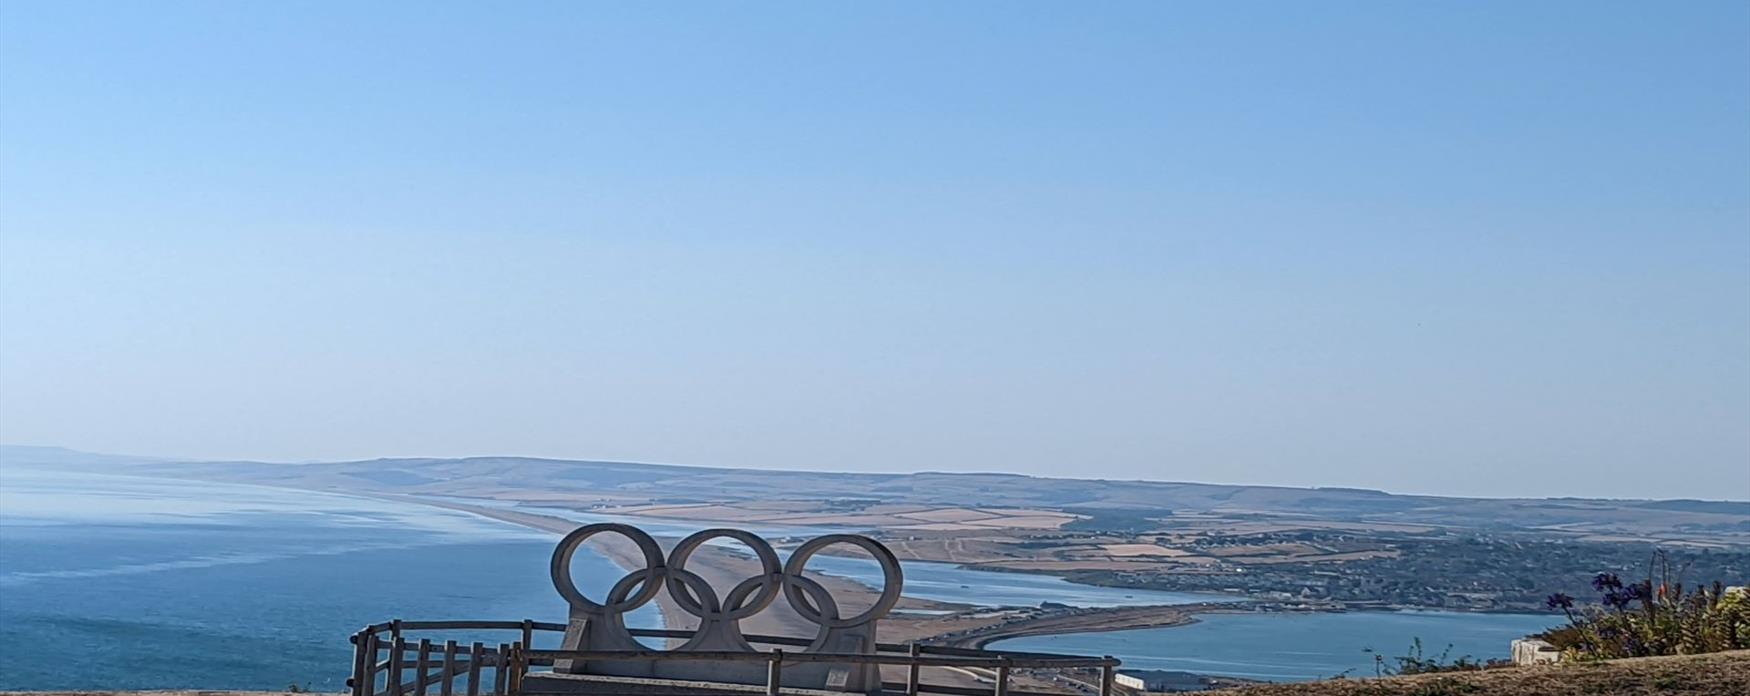 A view of the a long thin strip of beach with water either side extending away from the photographer. A stone statue of the Olympic rings is in the foreground. The built up area of Portland and Chesil is visible to the right of the image.